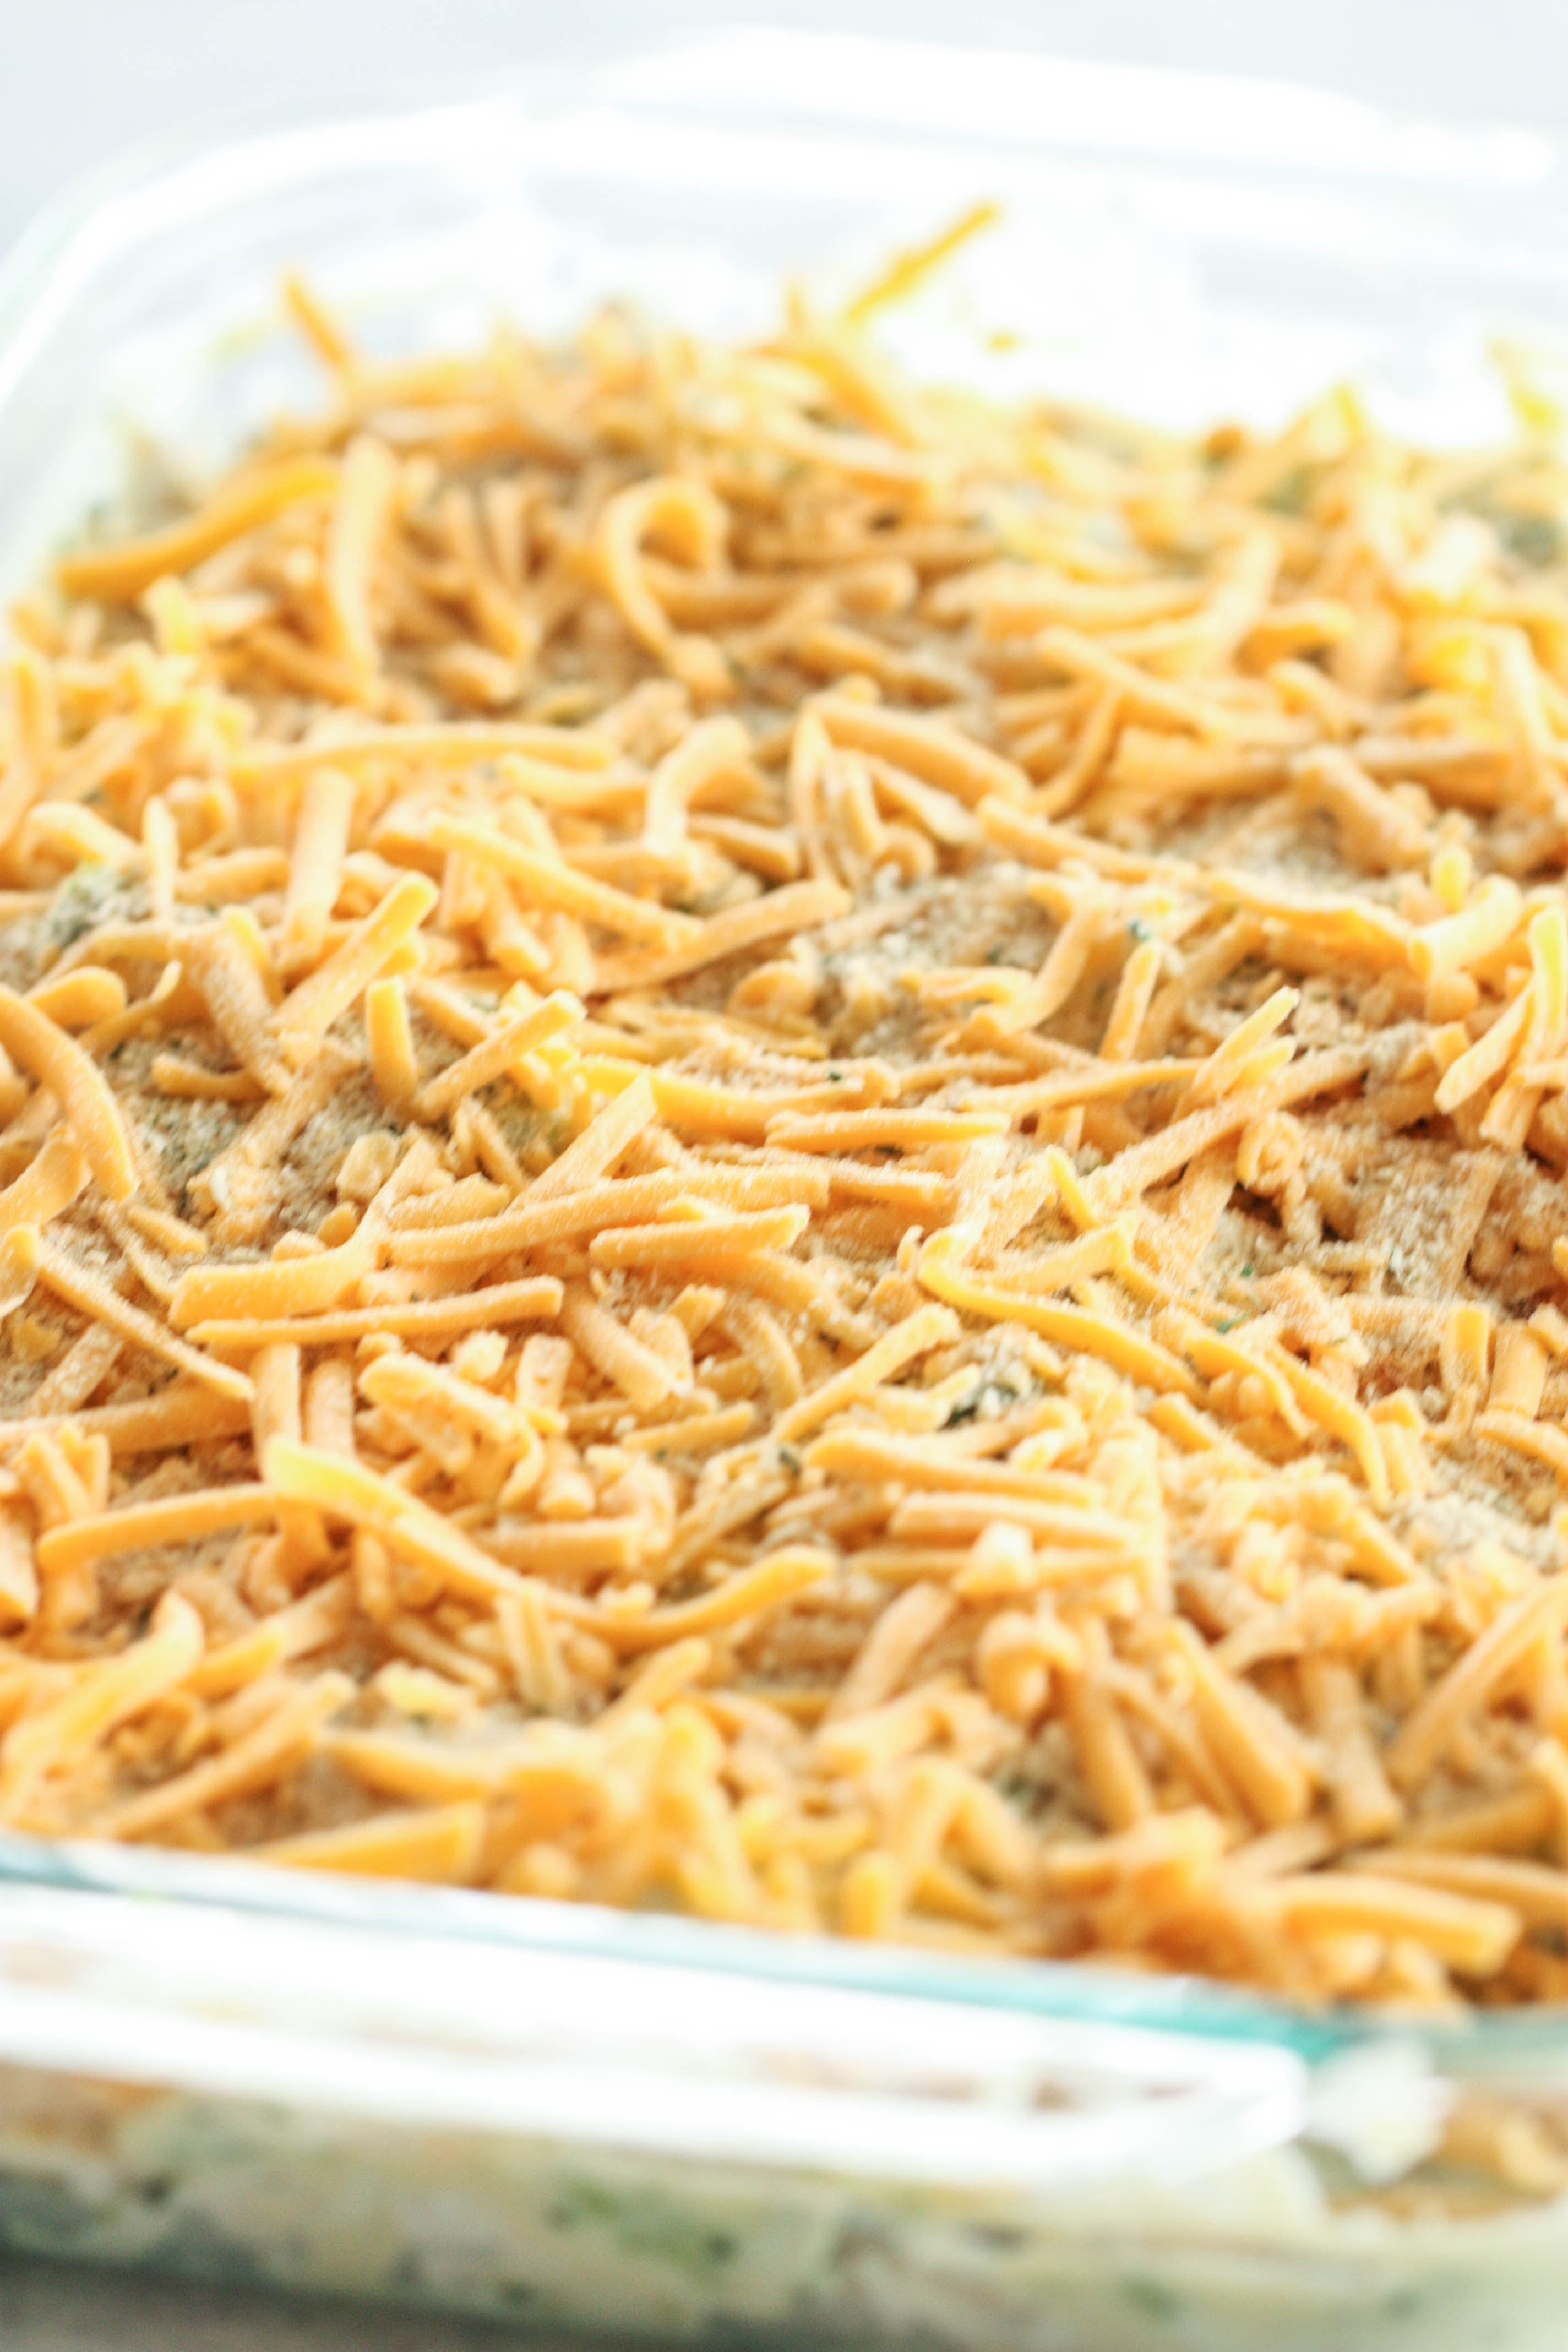 Unbaked Easy Chicken and Broccoli Casserole in a casserole dish